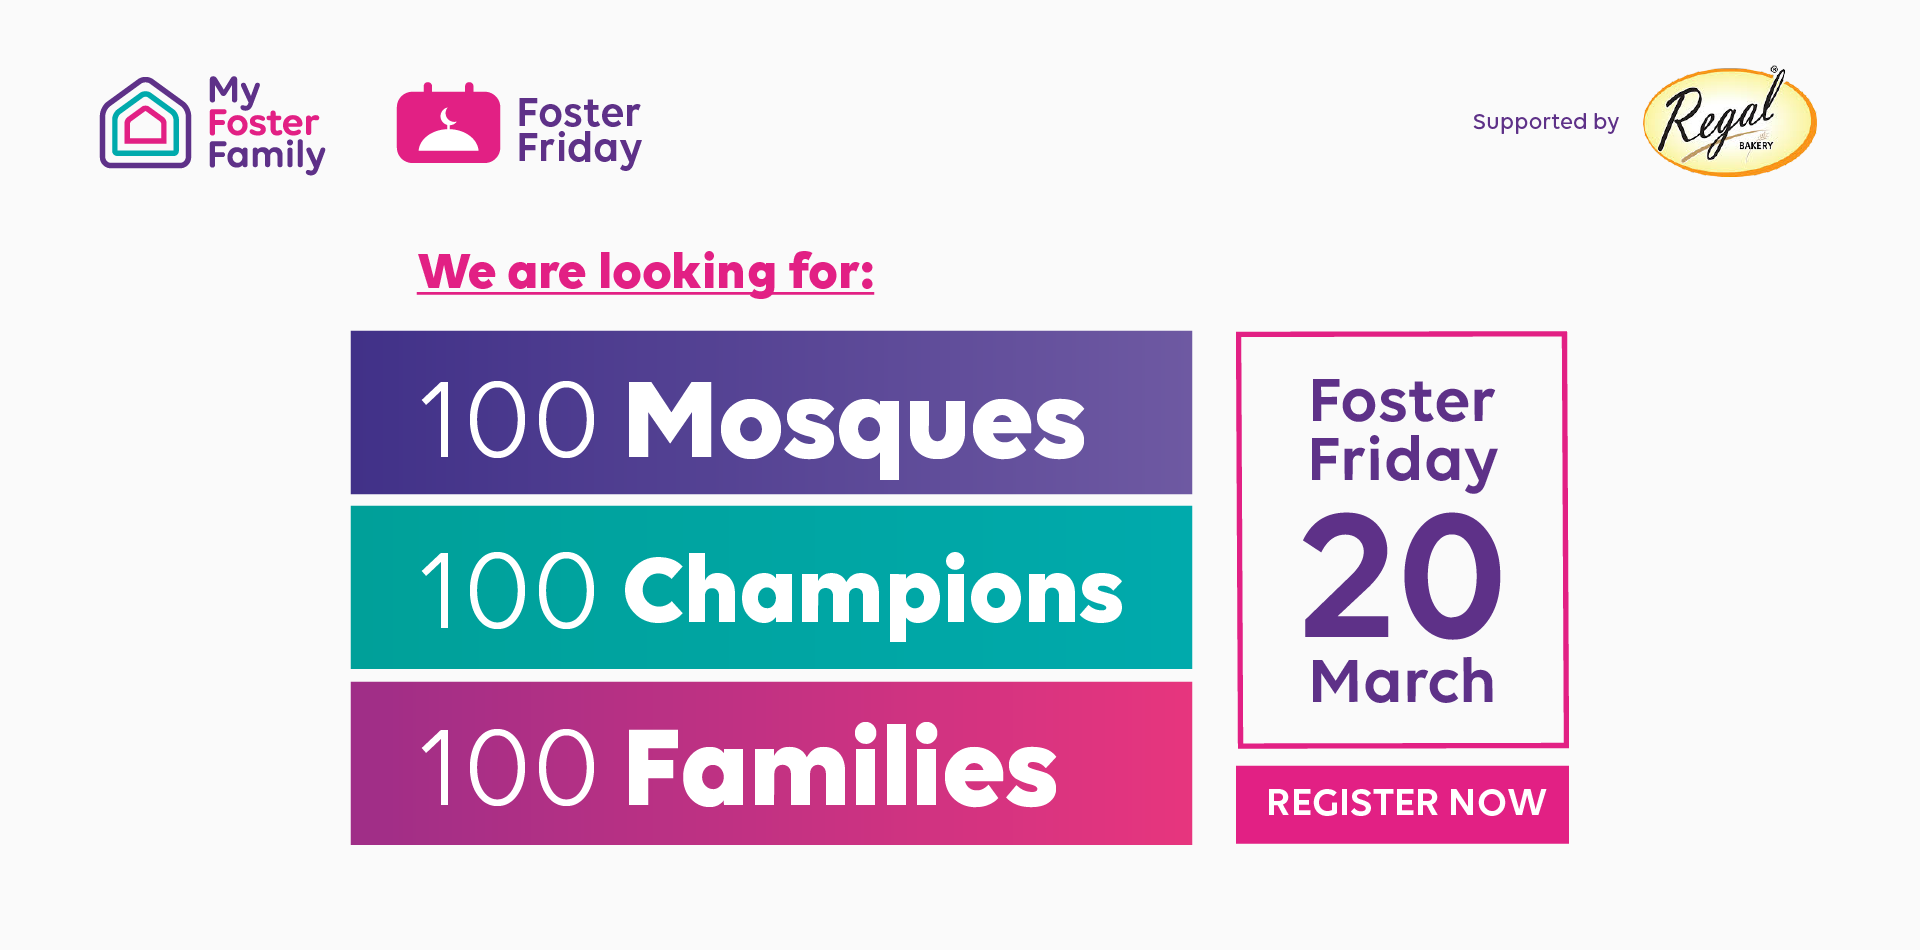 Foster Friday 2020 is Coming: Why You Should Get Involved